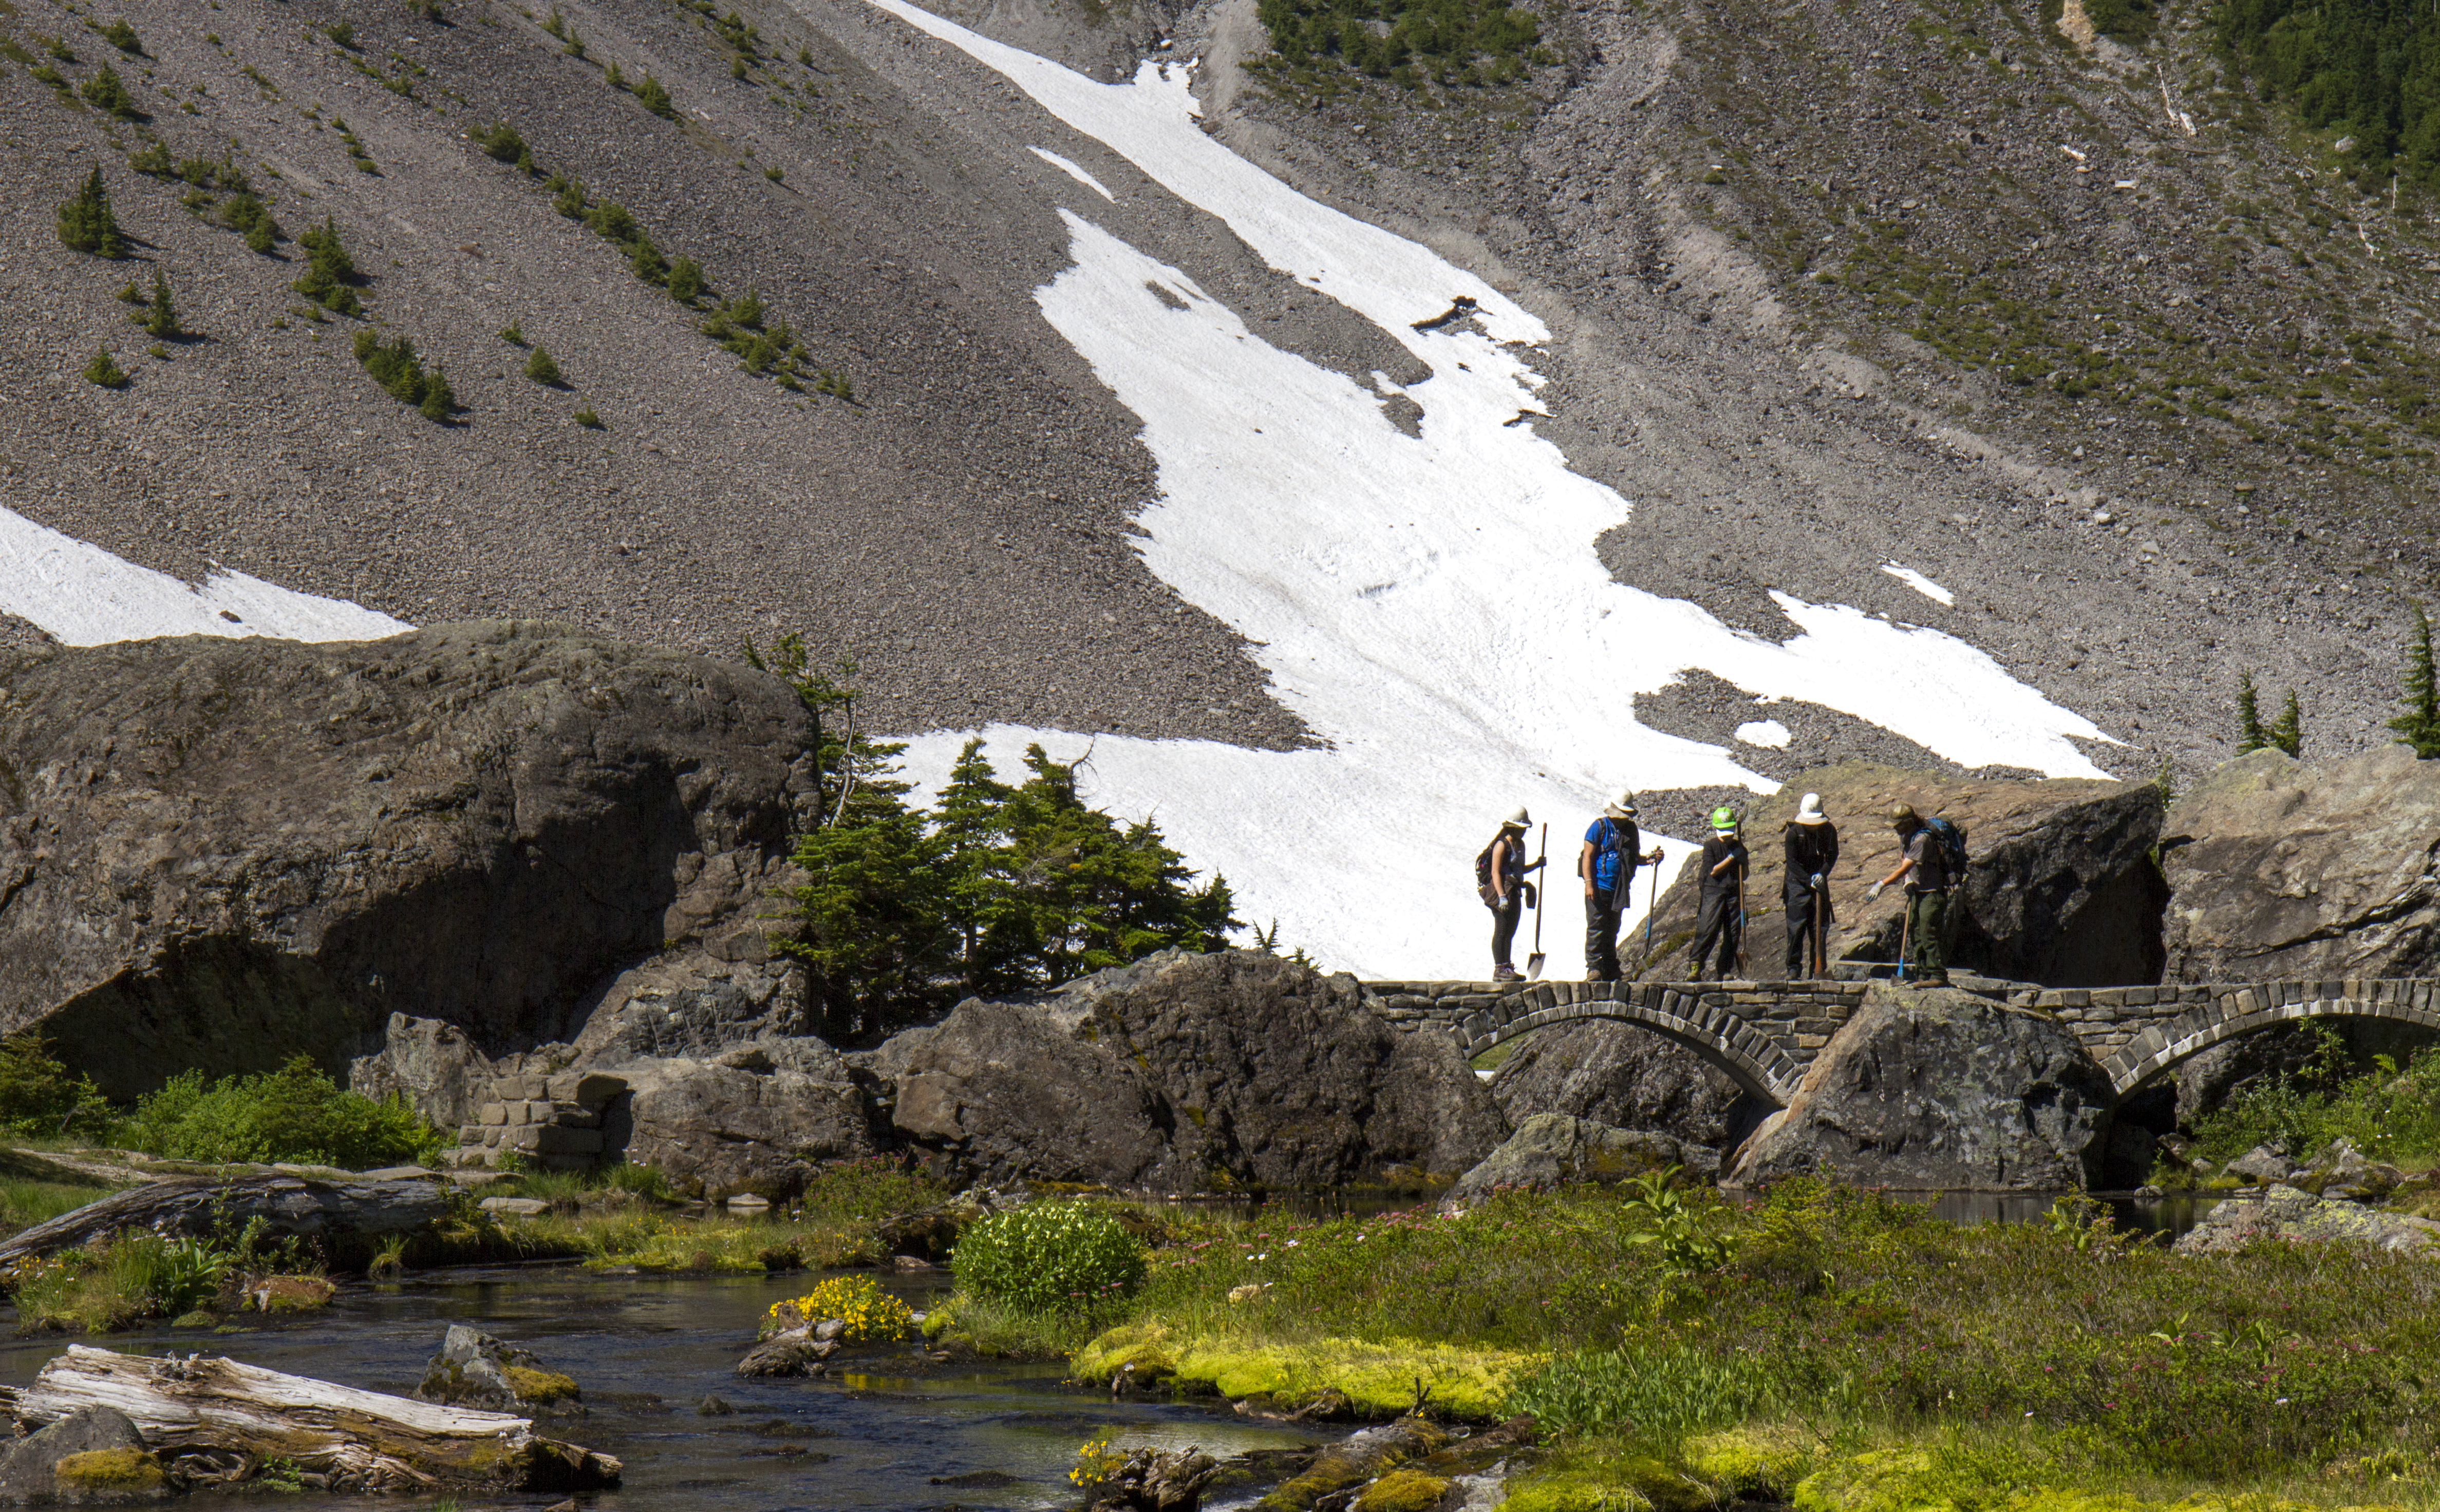 long shot of five people standing on a bridge above a stream holding shovels. behind them is a sloping shale covered hill with a patch of snow. the stream is surrounded by bus sized boulders